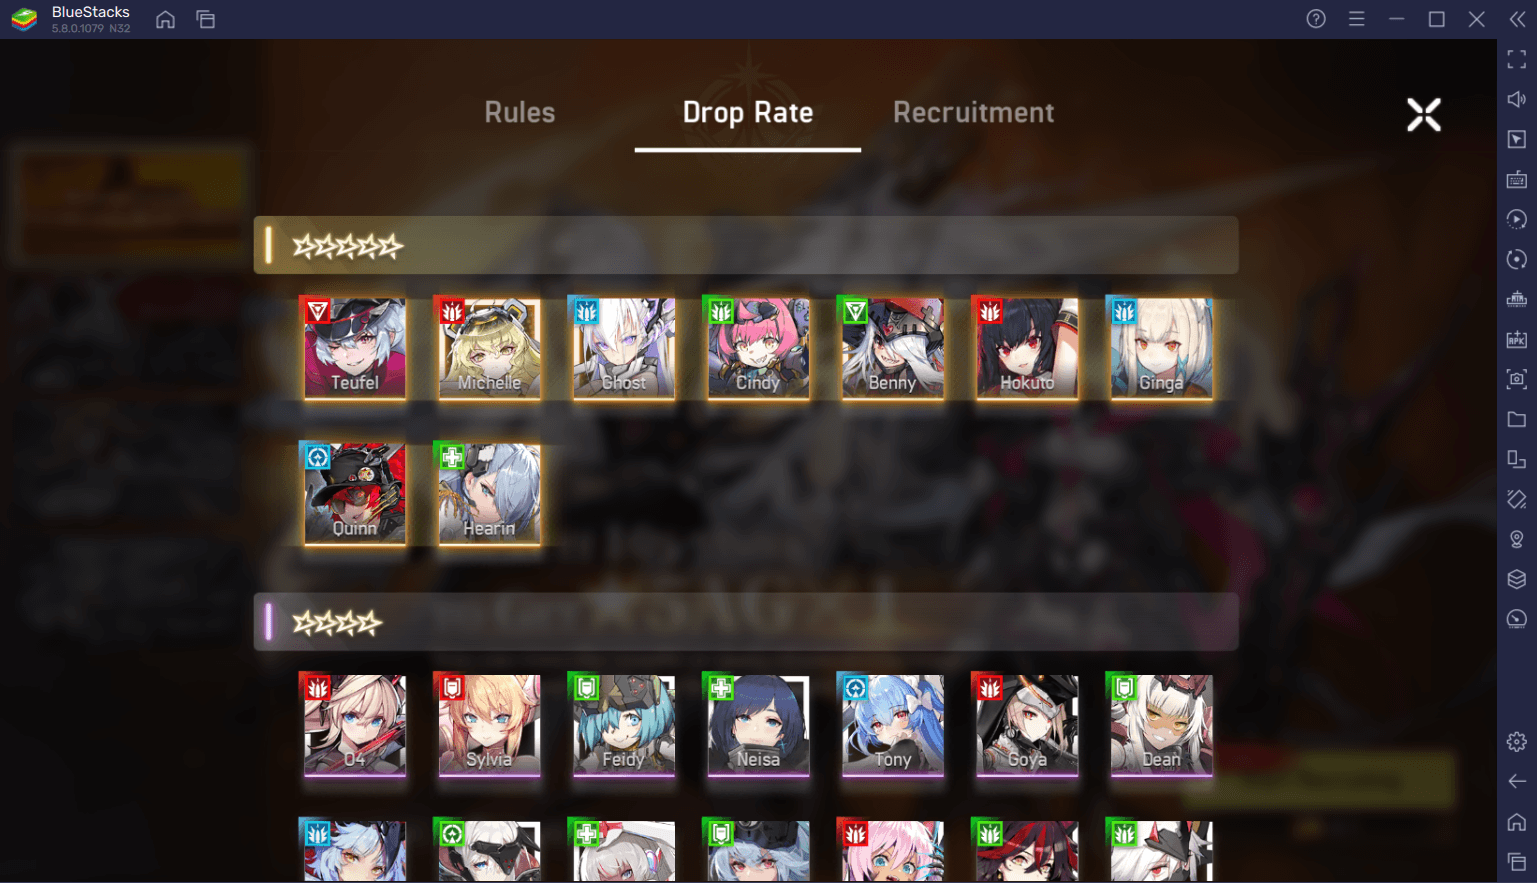 Get the Strongest Start in Artery Gear: Fusion with This Rerolling Guide and Rerolling Tier List